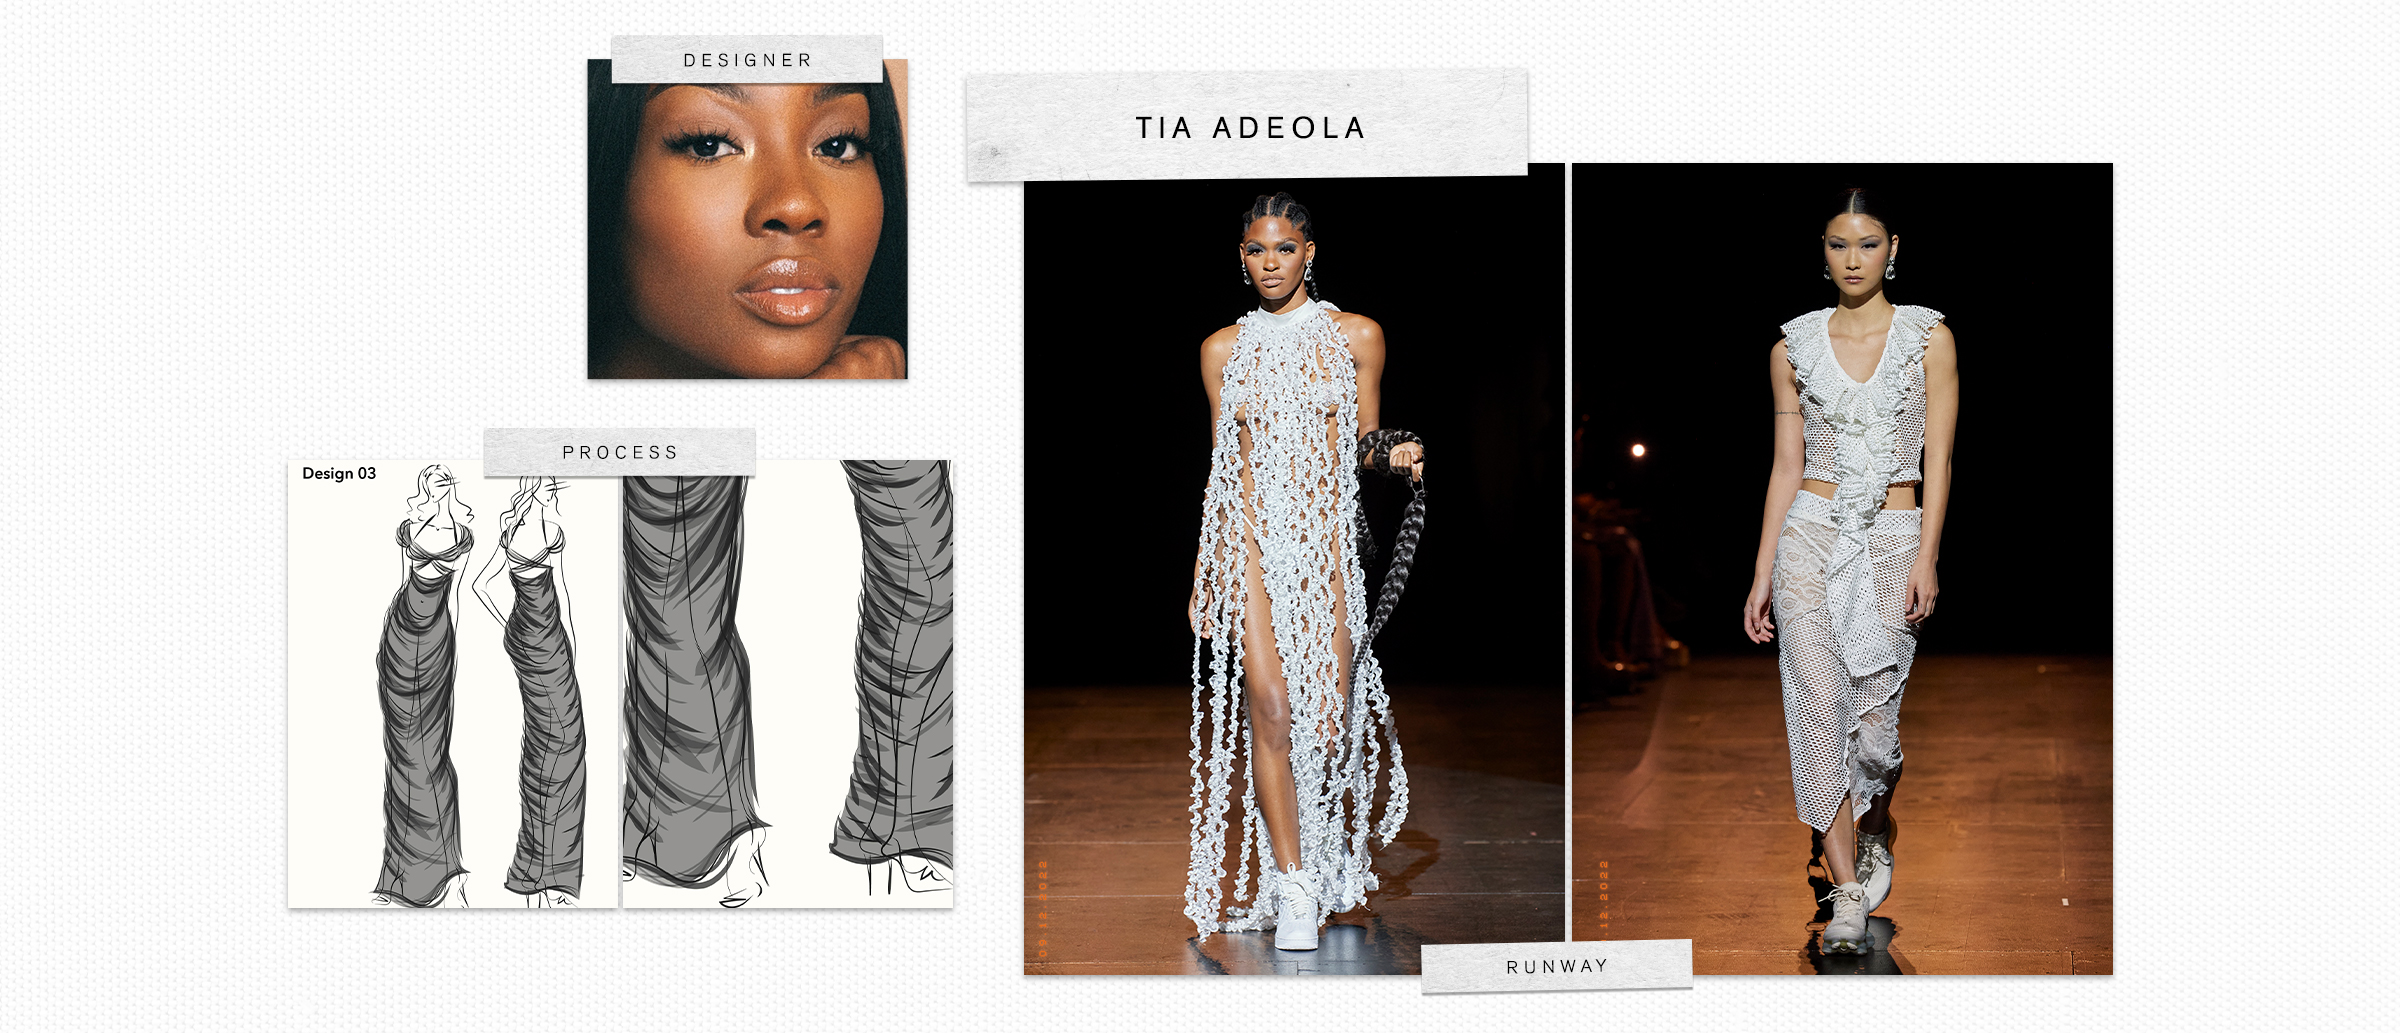 Fashion designer, Tia Adeola and her most recent spring/summer 2023 collection